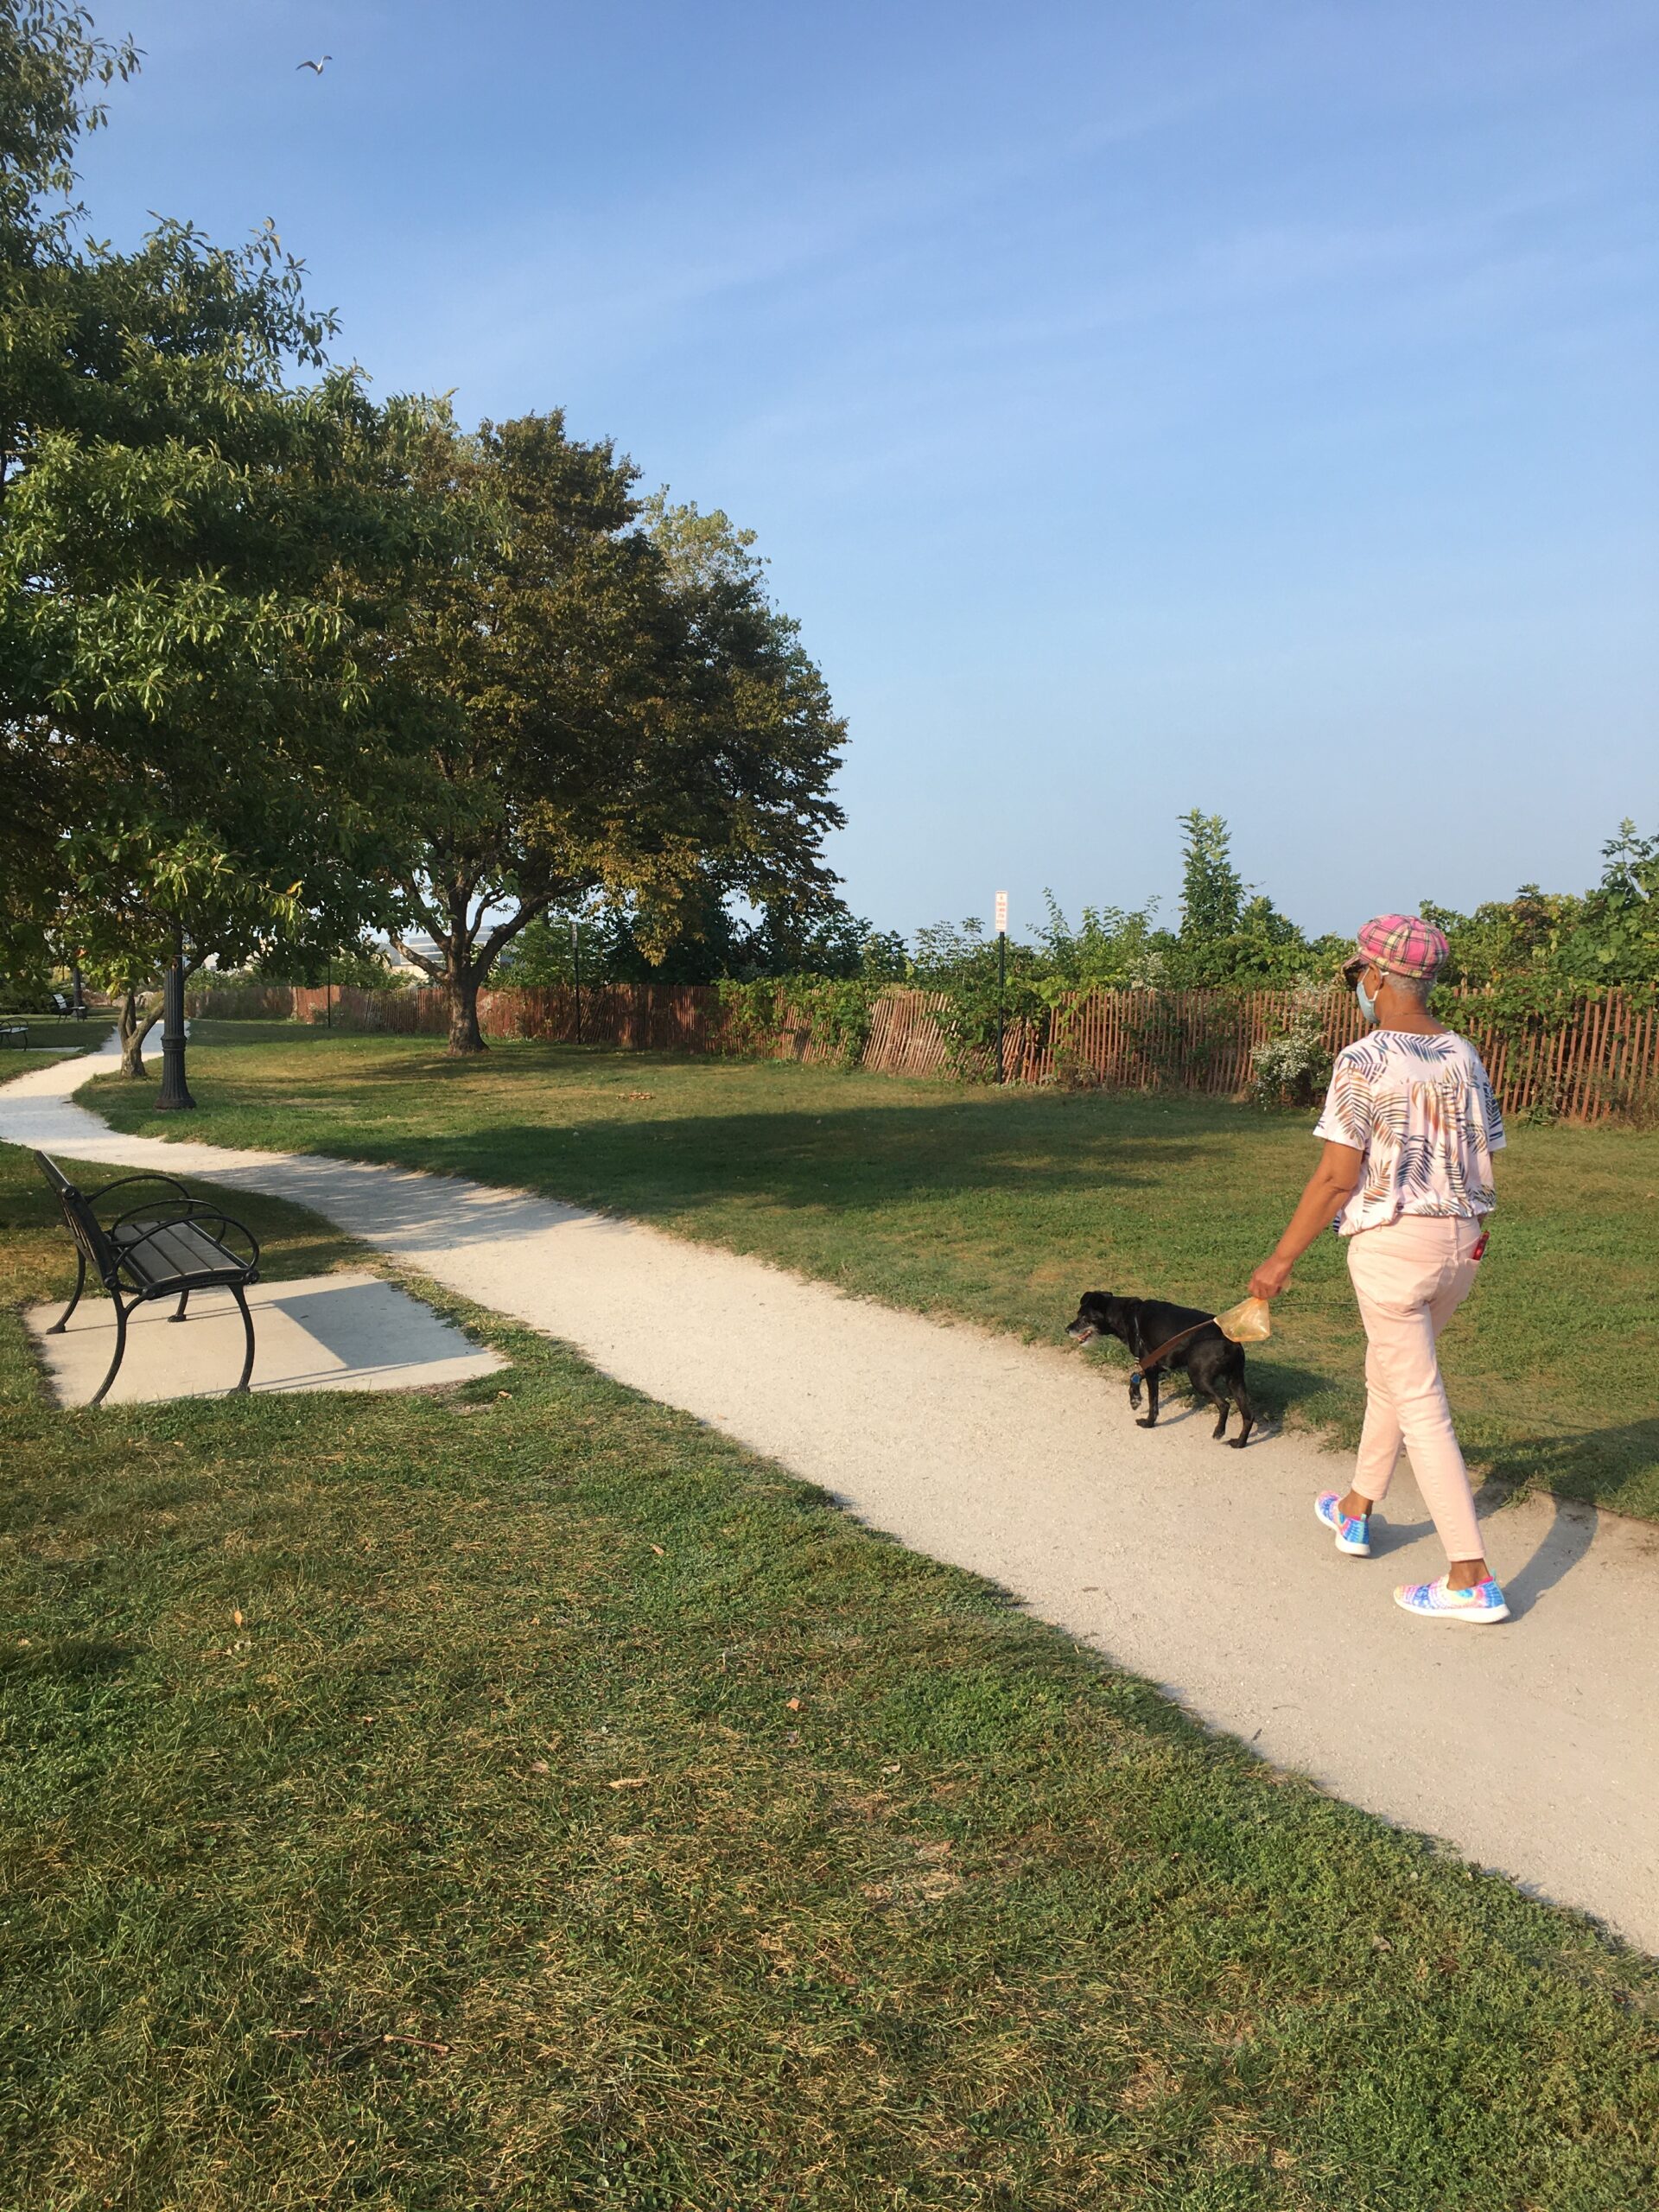 Lincoln Street Beach surfaces as possible dog park candidate